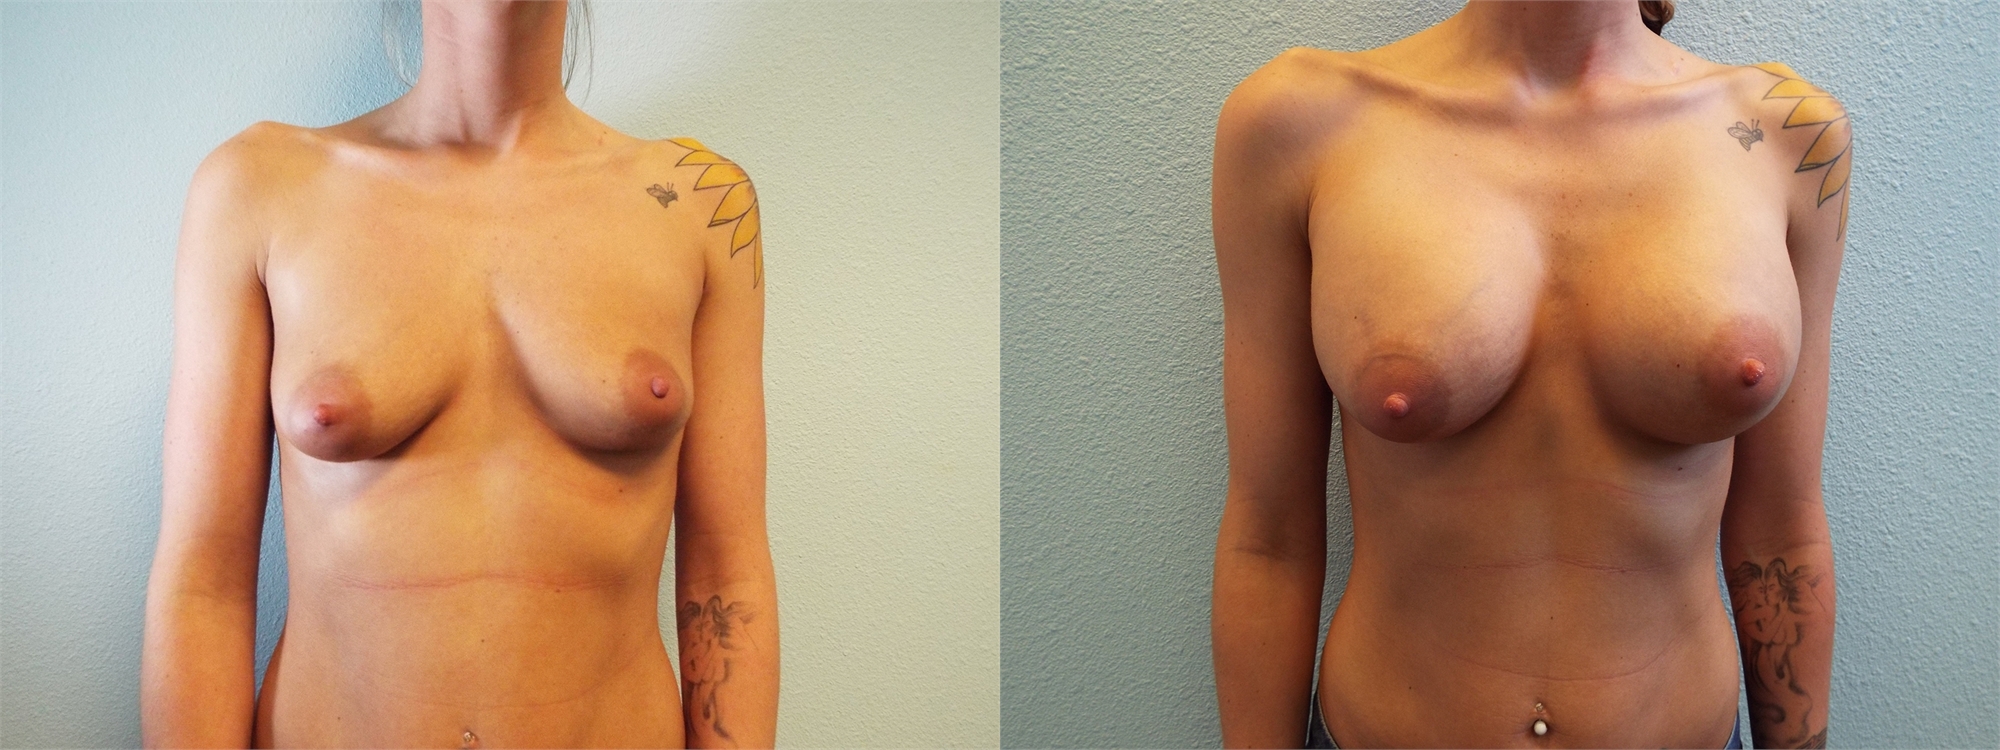 Before and After Breast Augmentation Surgery Tacoma, WA